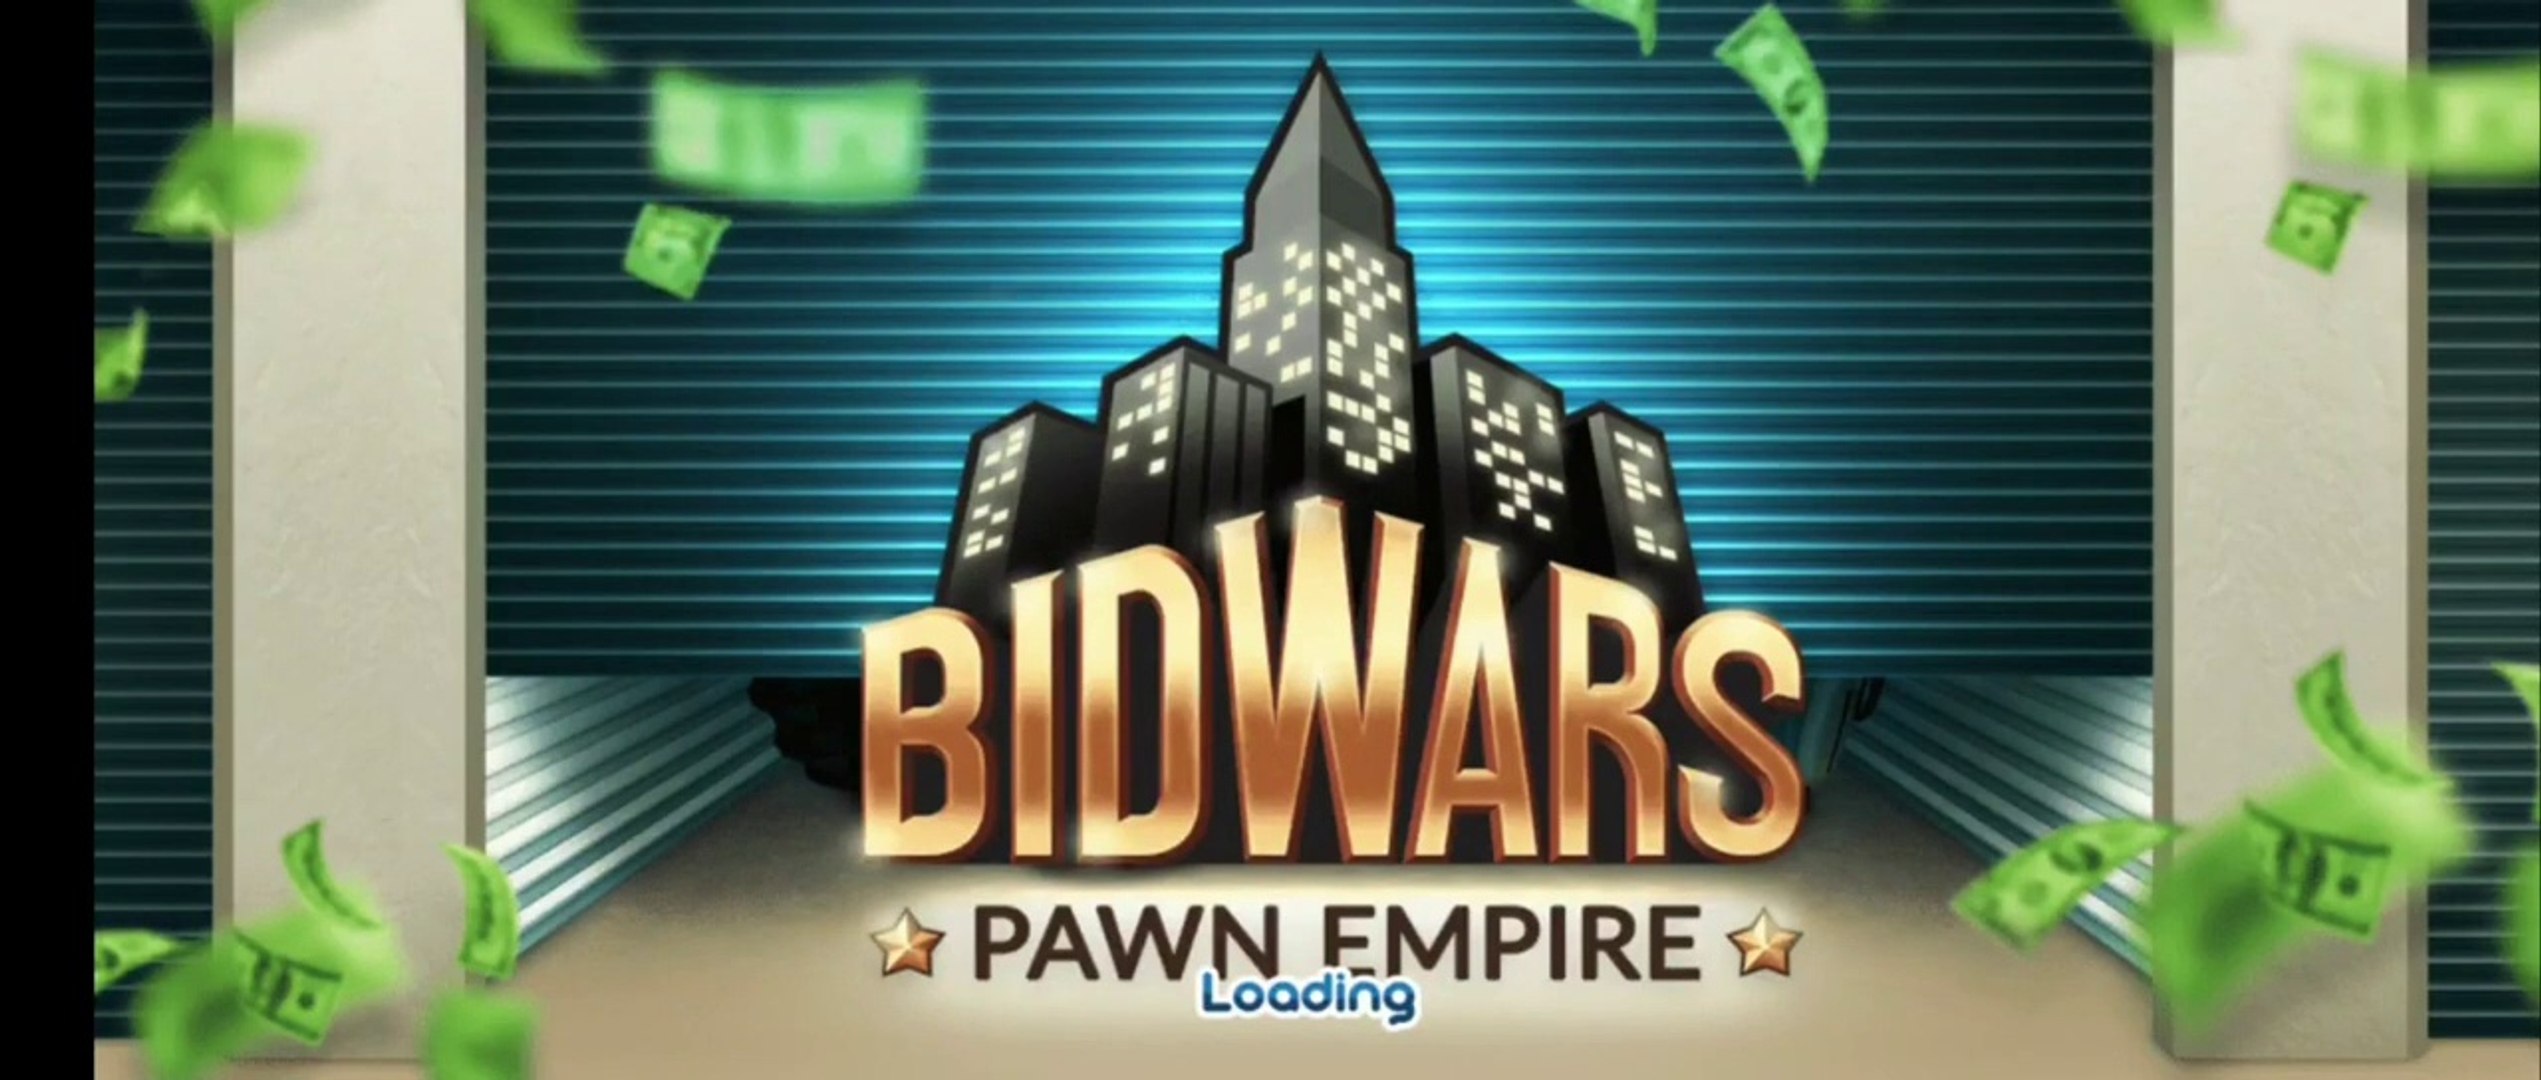 BID WARS: PAWN EMPIRE: Library and game completed - Video Dailymotion